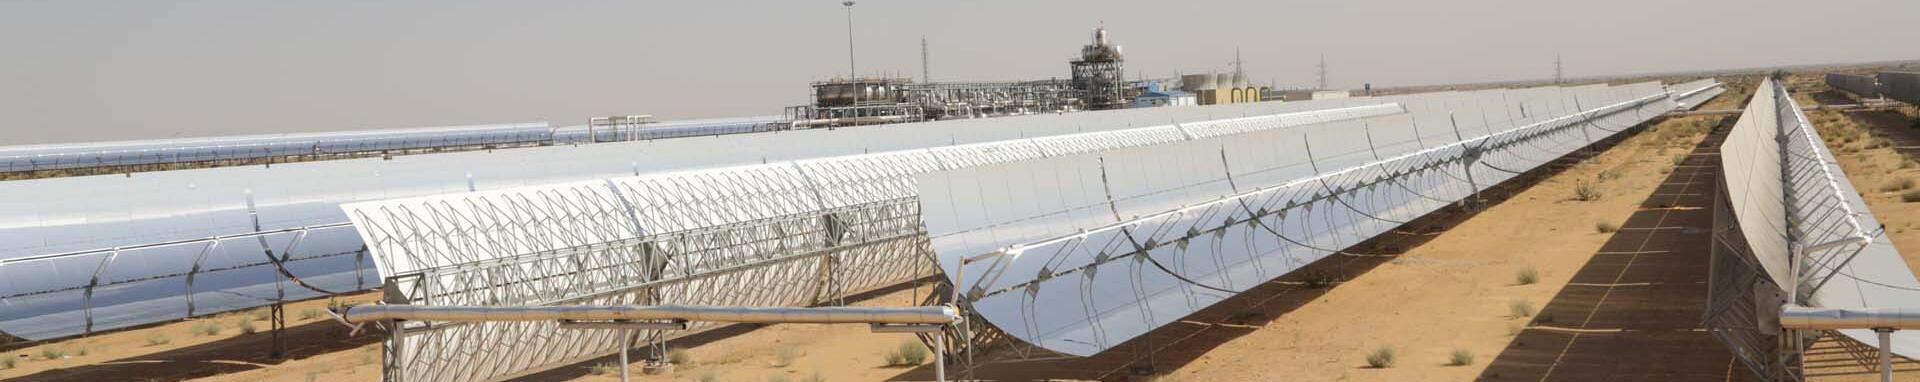 CIF Action Solar power in the deserts of Rajasthan, India. Photo Credit - Jitendra Parihar/Thomson Reuters Foundation